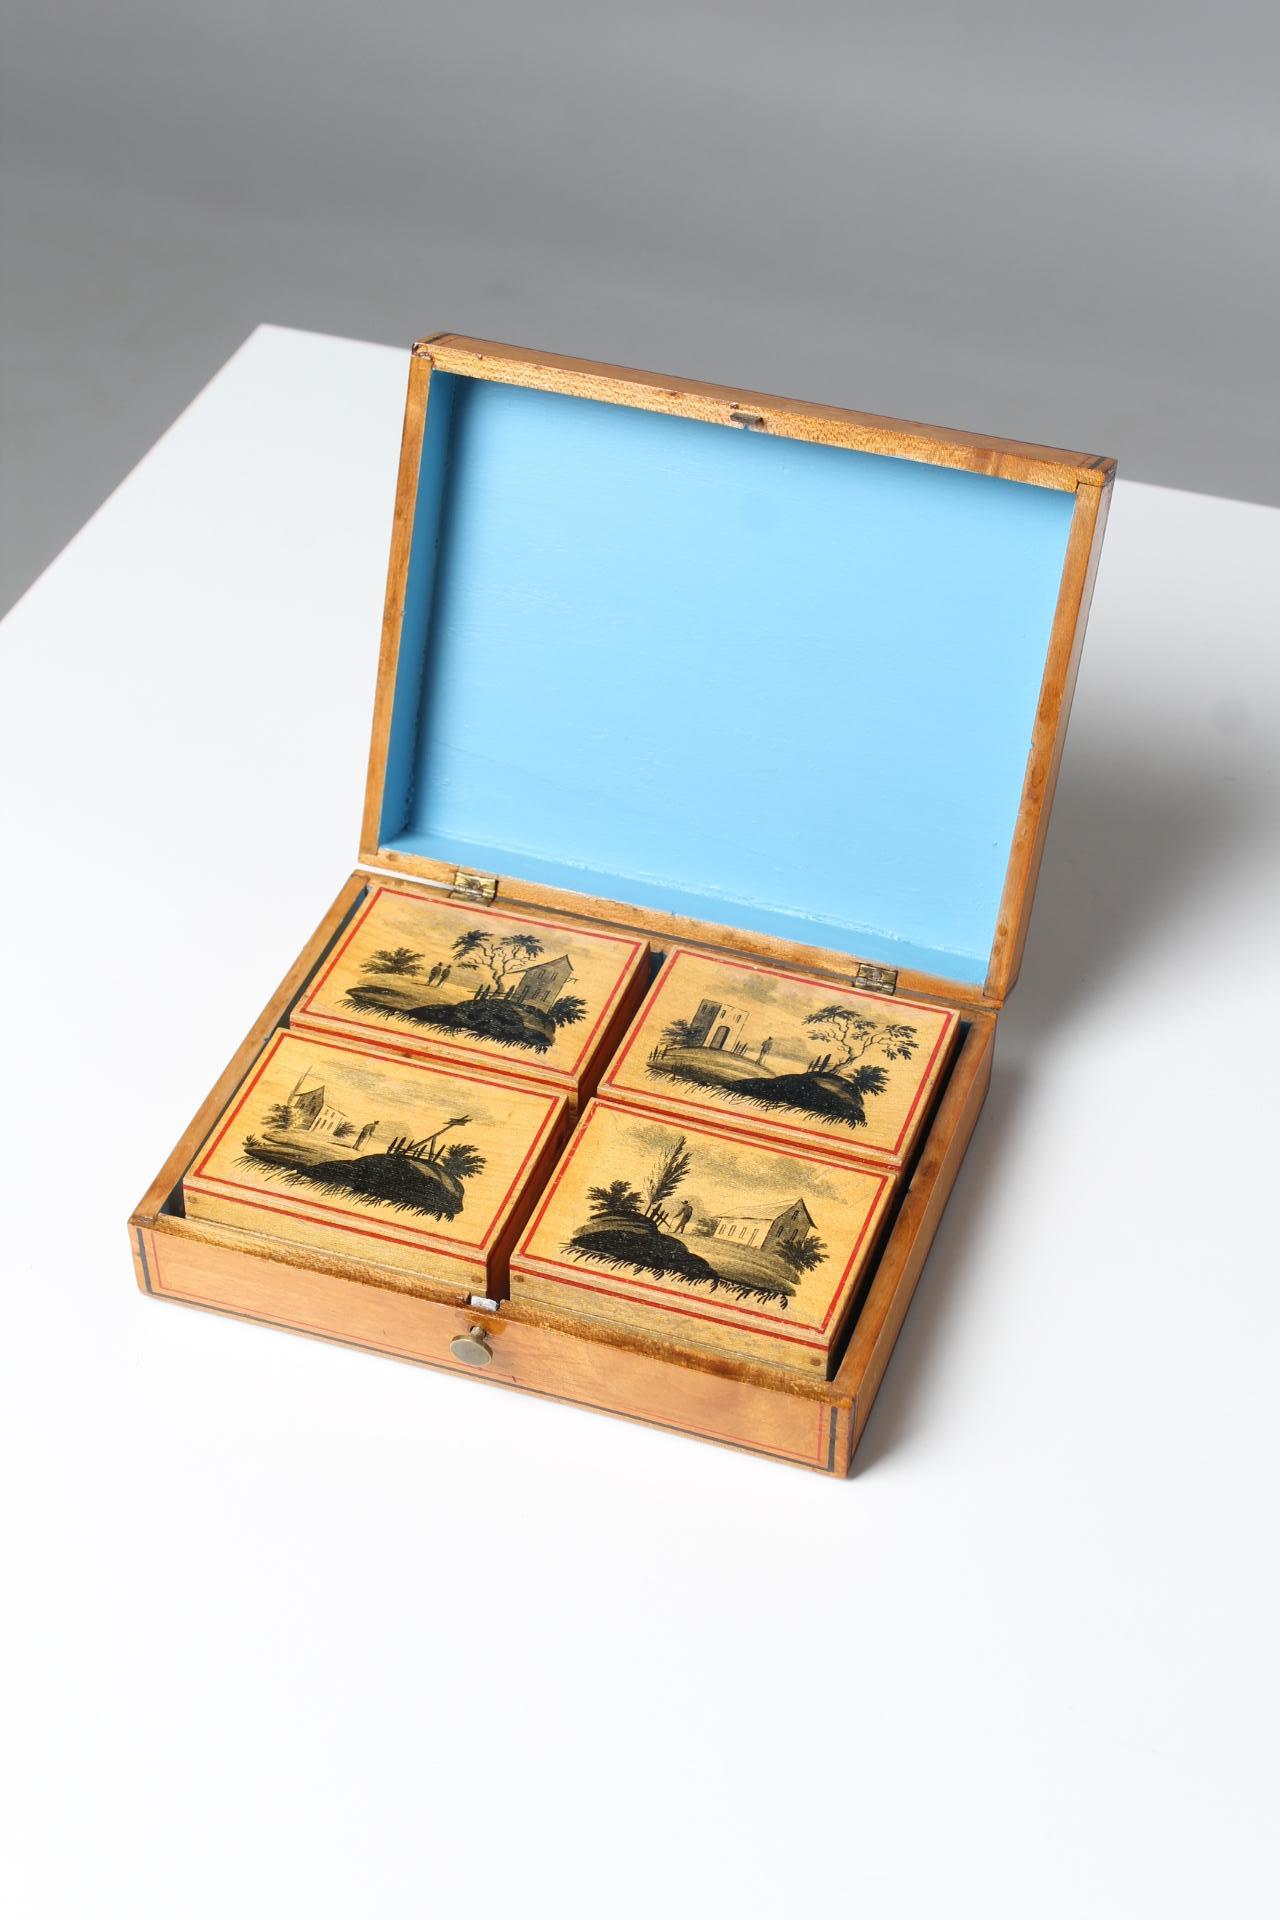 Painted Mother Of Pearl Game Pieces in Wooden Box in Chinese Style For Sale